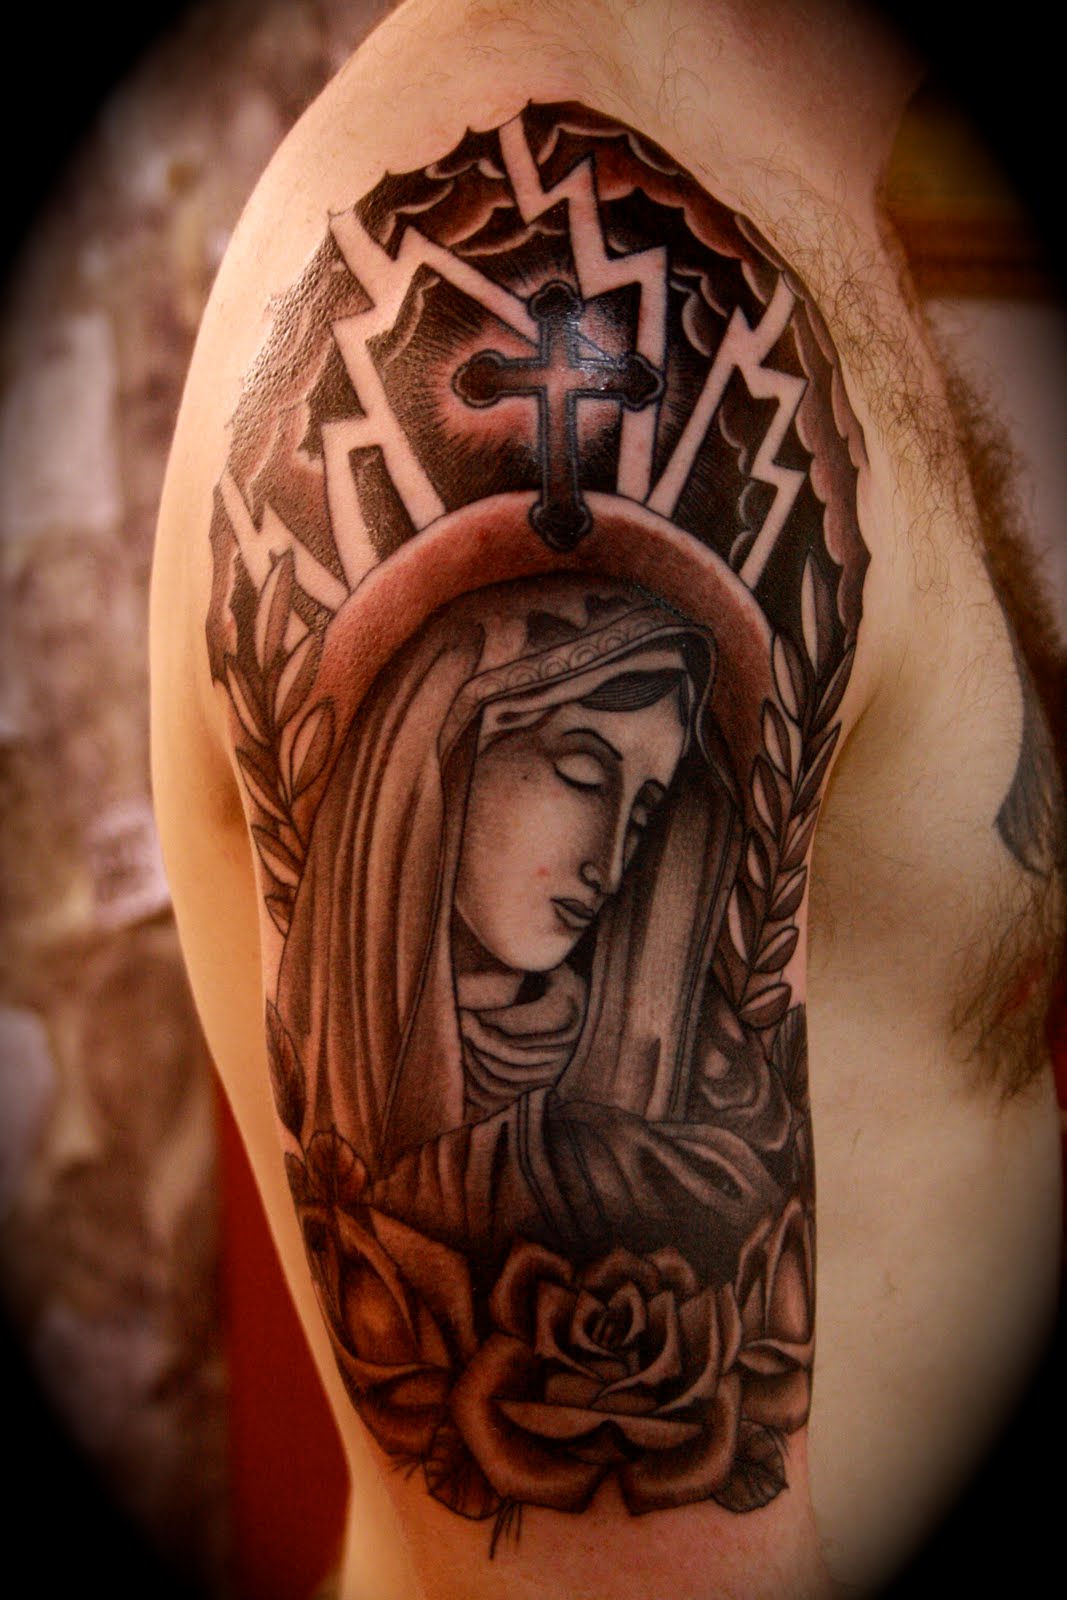 Religious Tattoos Designs, Ideas and Meaning | Tattoos For You